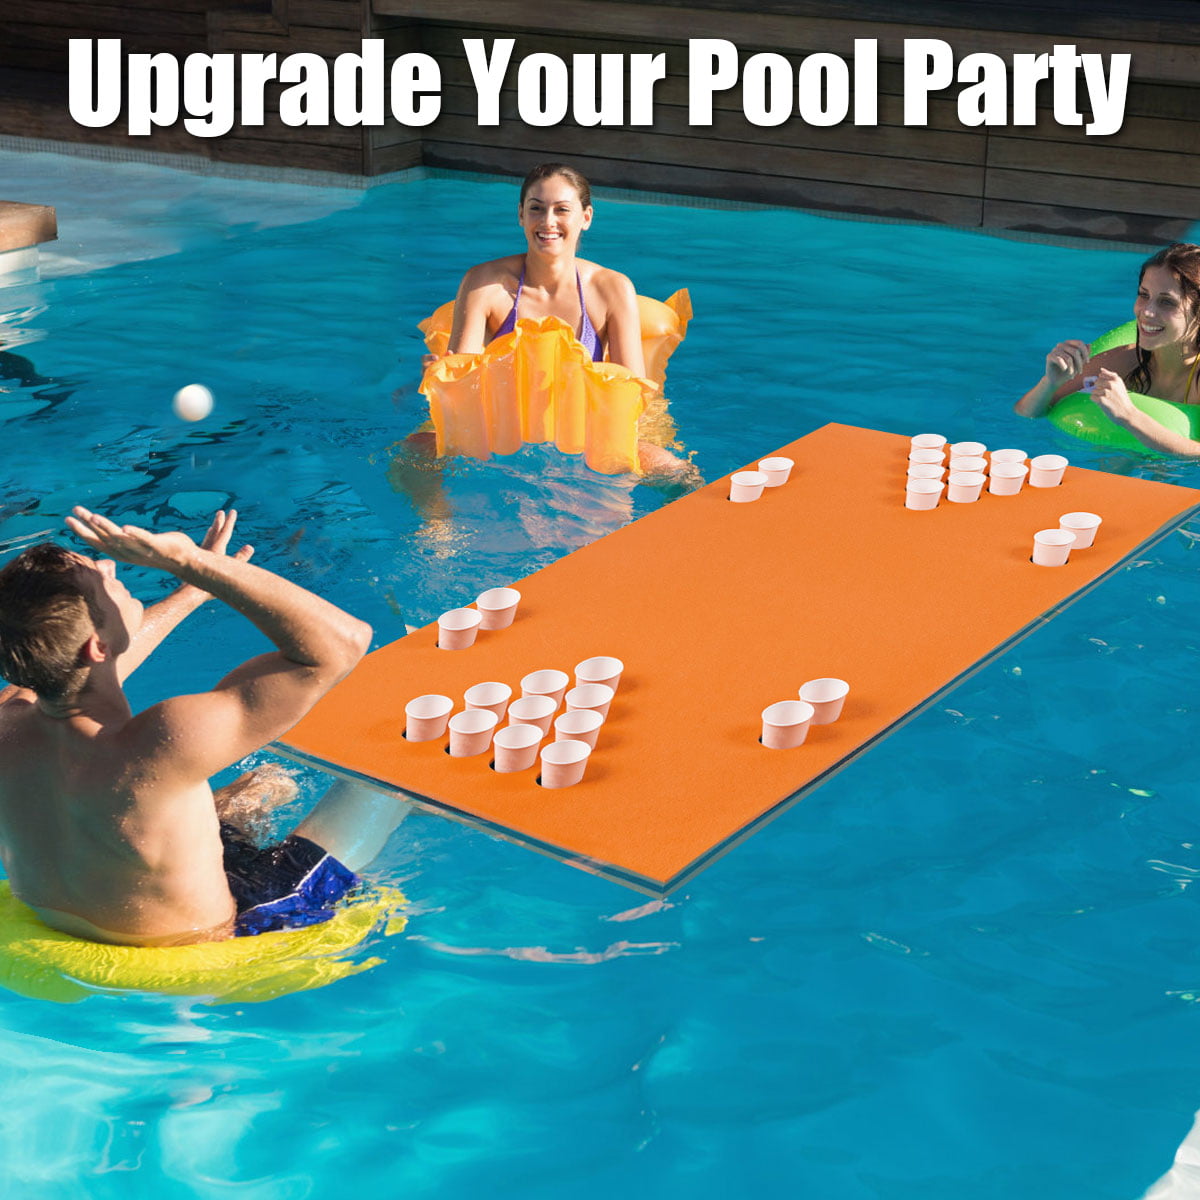 Details about   5.5' x 23.5" 3-Layer Multi-Purpose Floating Beer Pong Table